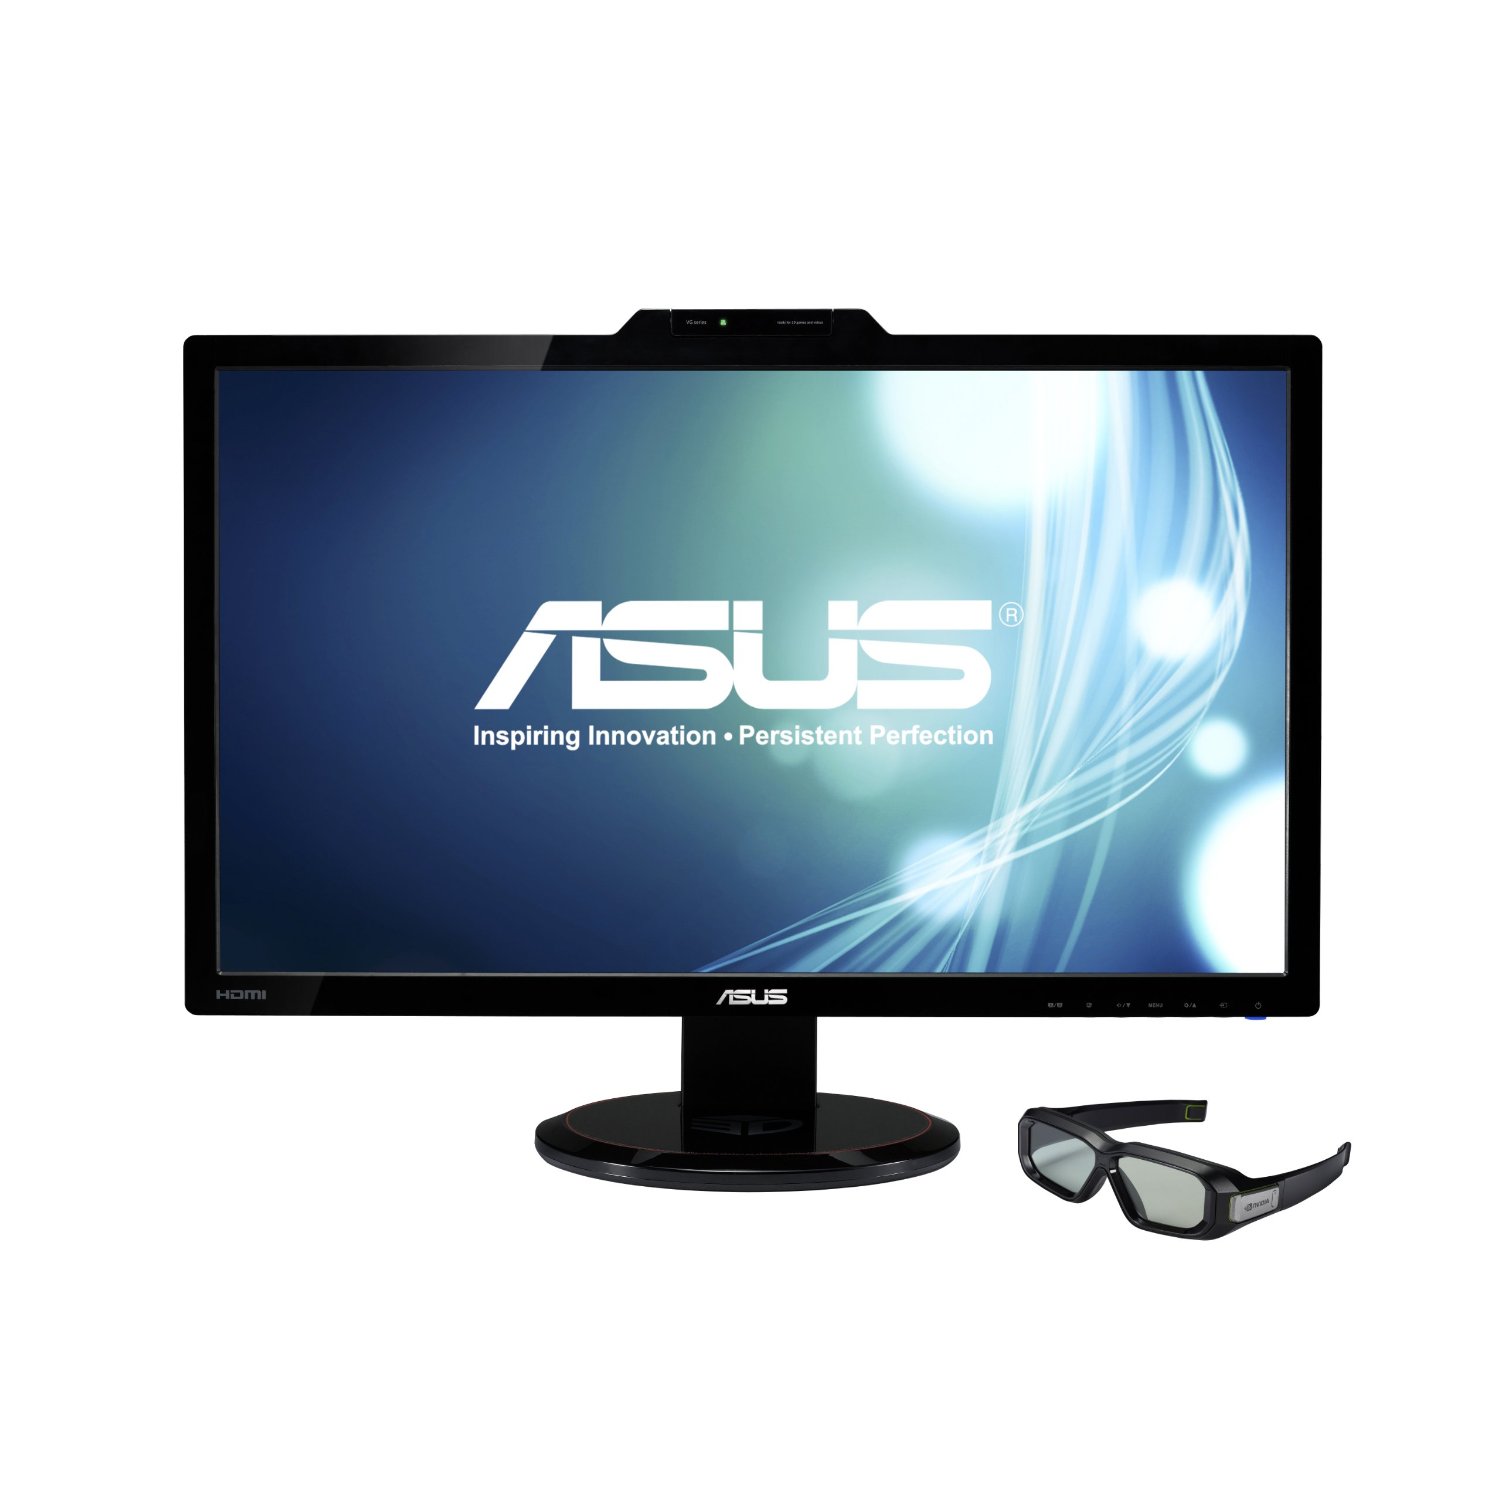 http://thetechjournal.com/wp-content/uploads/images/1207/1341219564-asus-vg278h-27inch-3d-fullhd-led-monitor-with-integrated-stereo-speakers-1.jpg